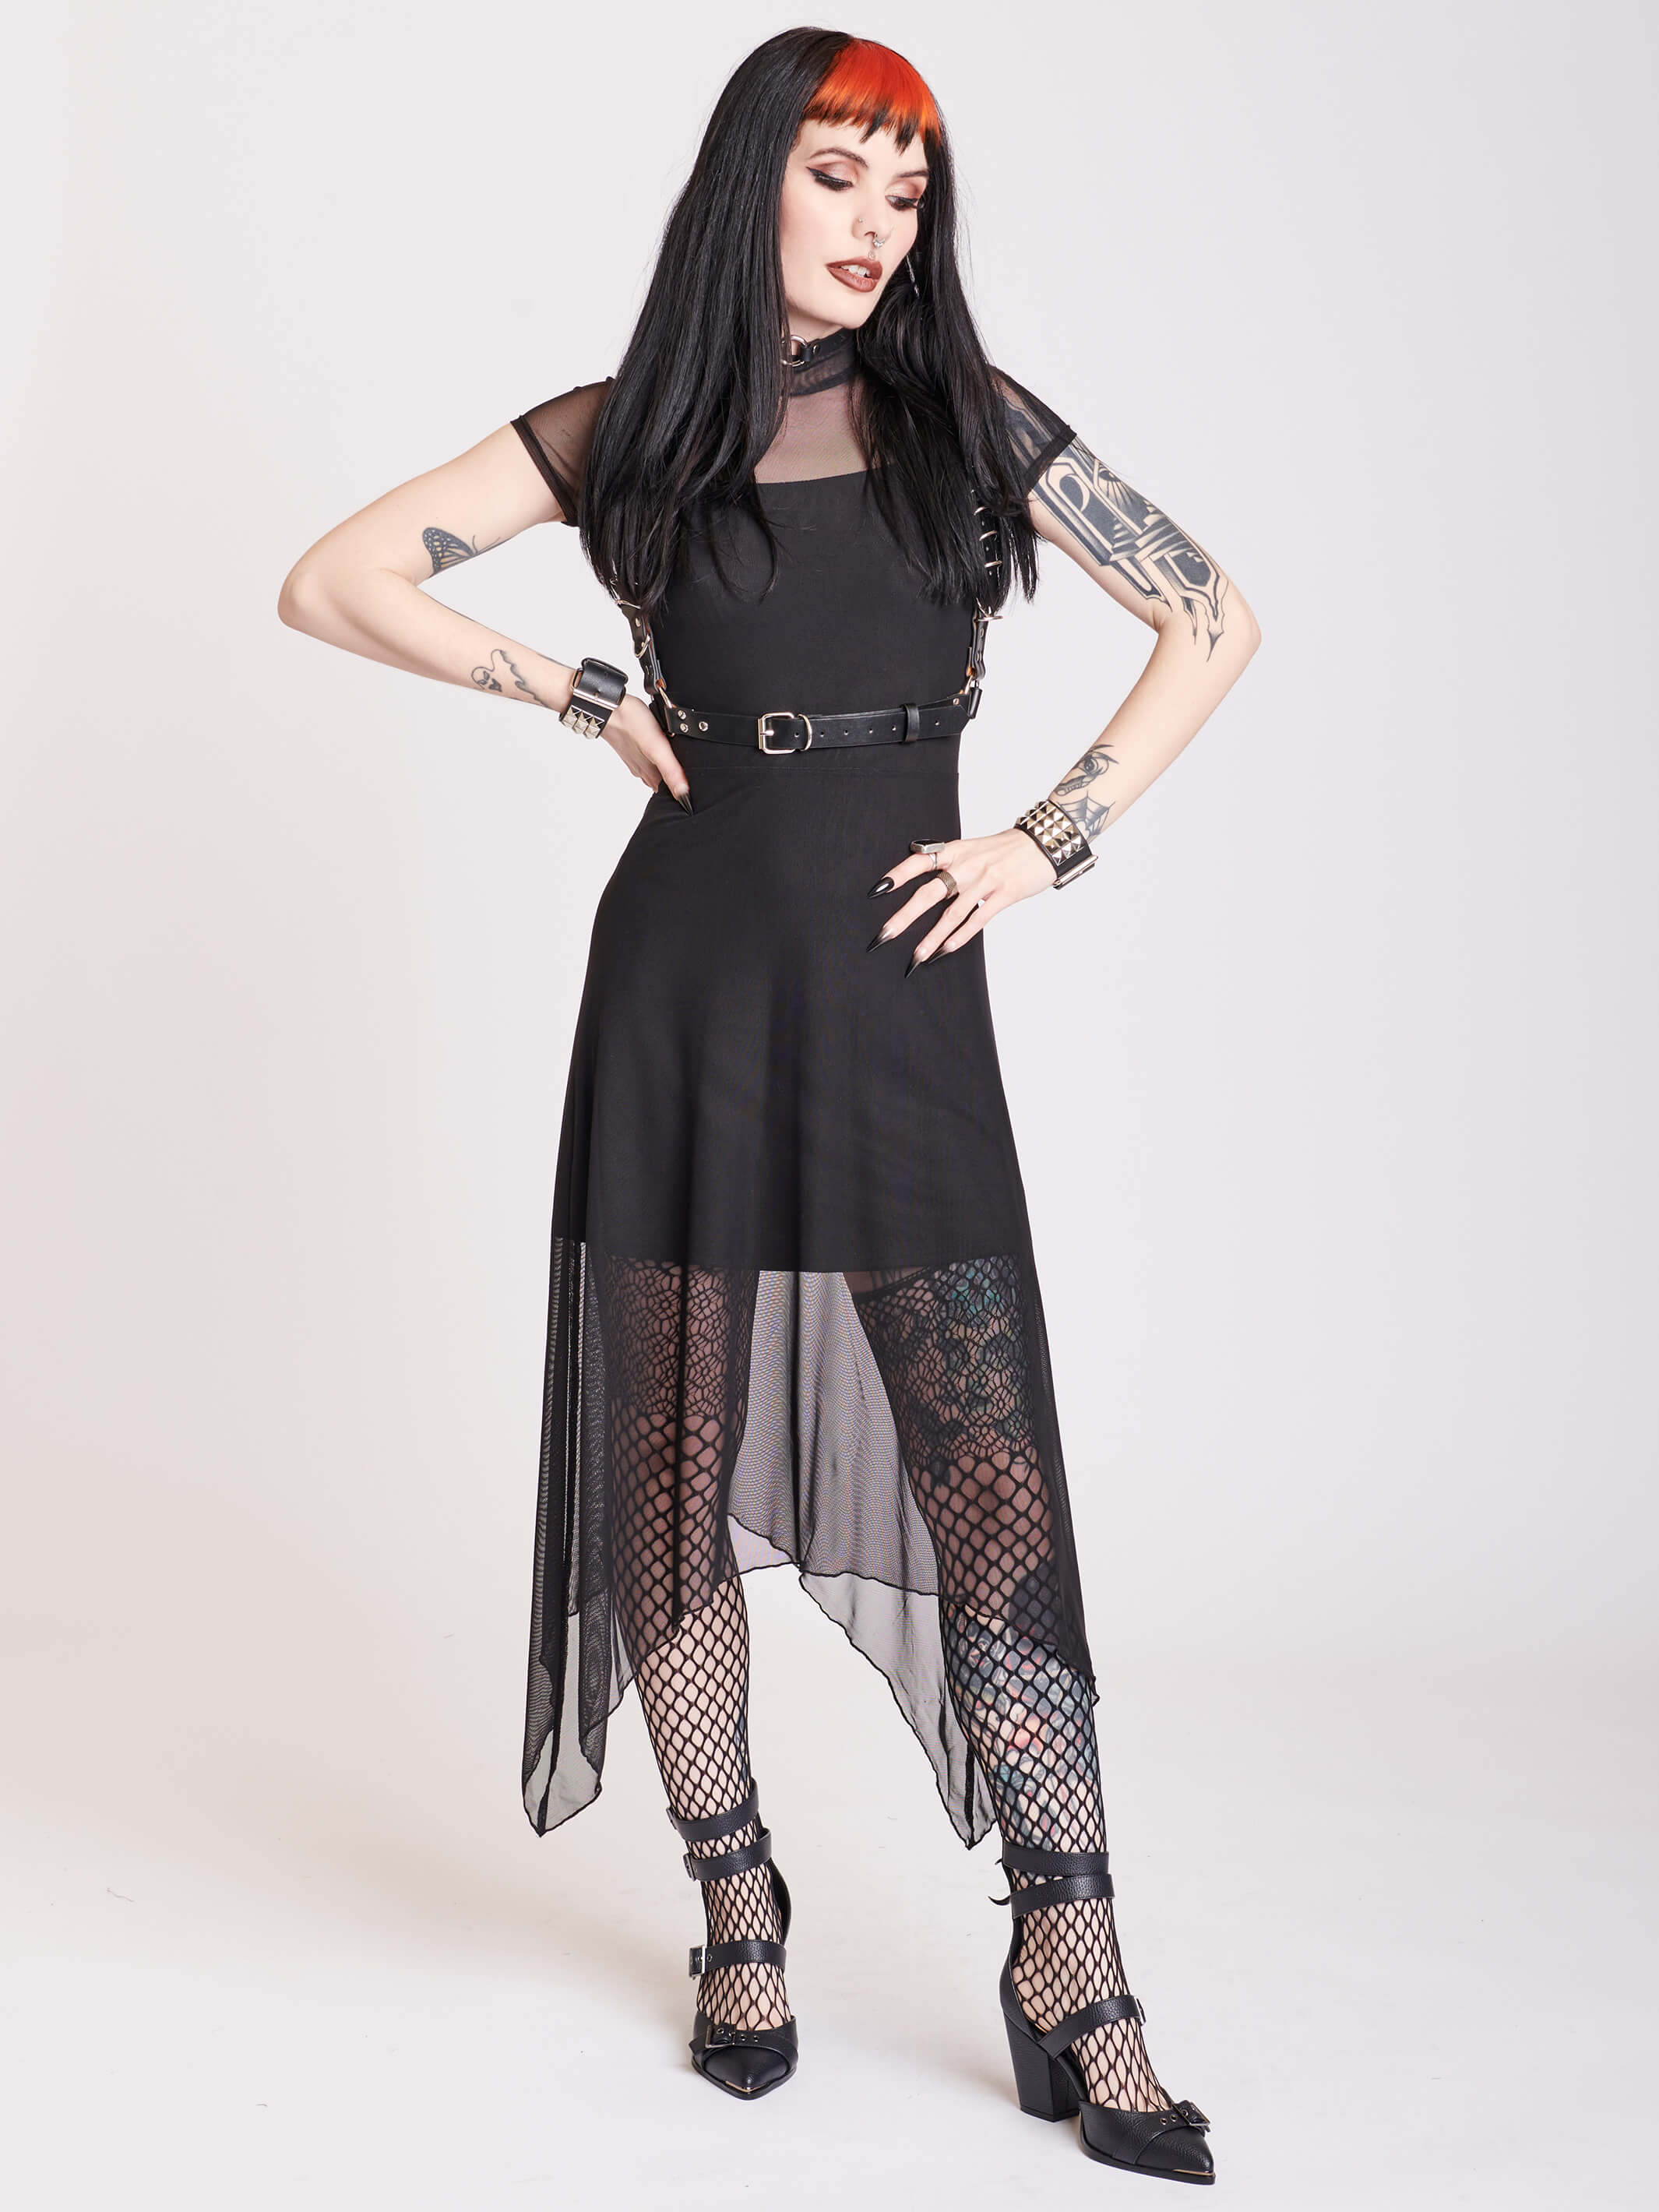 Shop Gothic Clothing for Men and Women